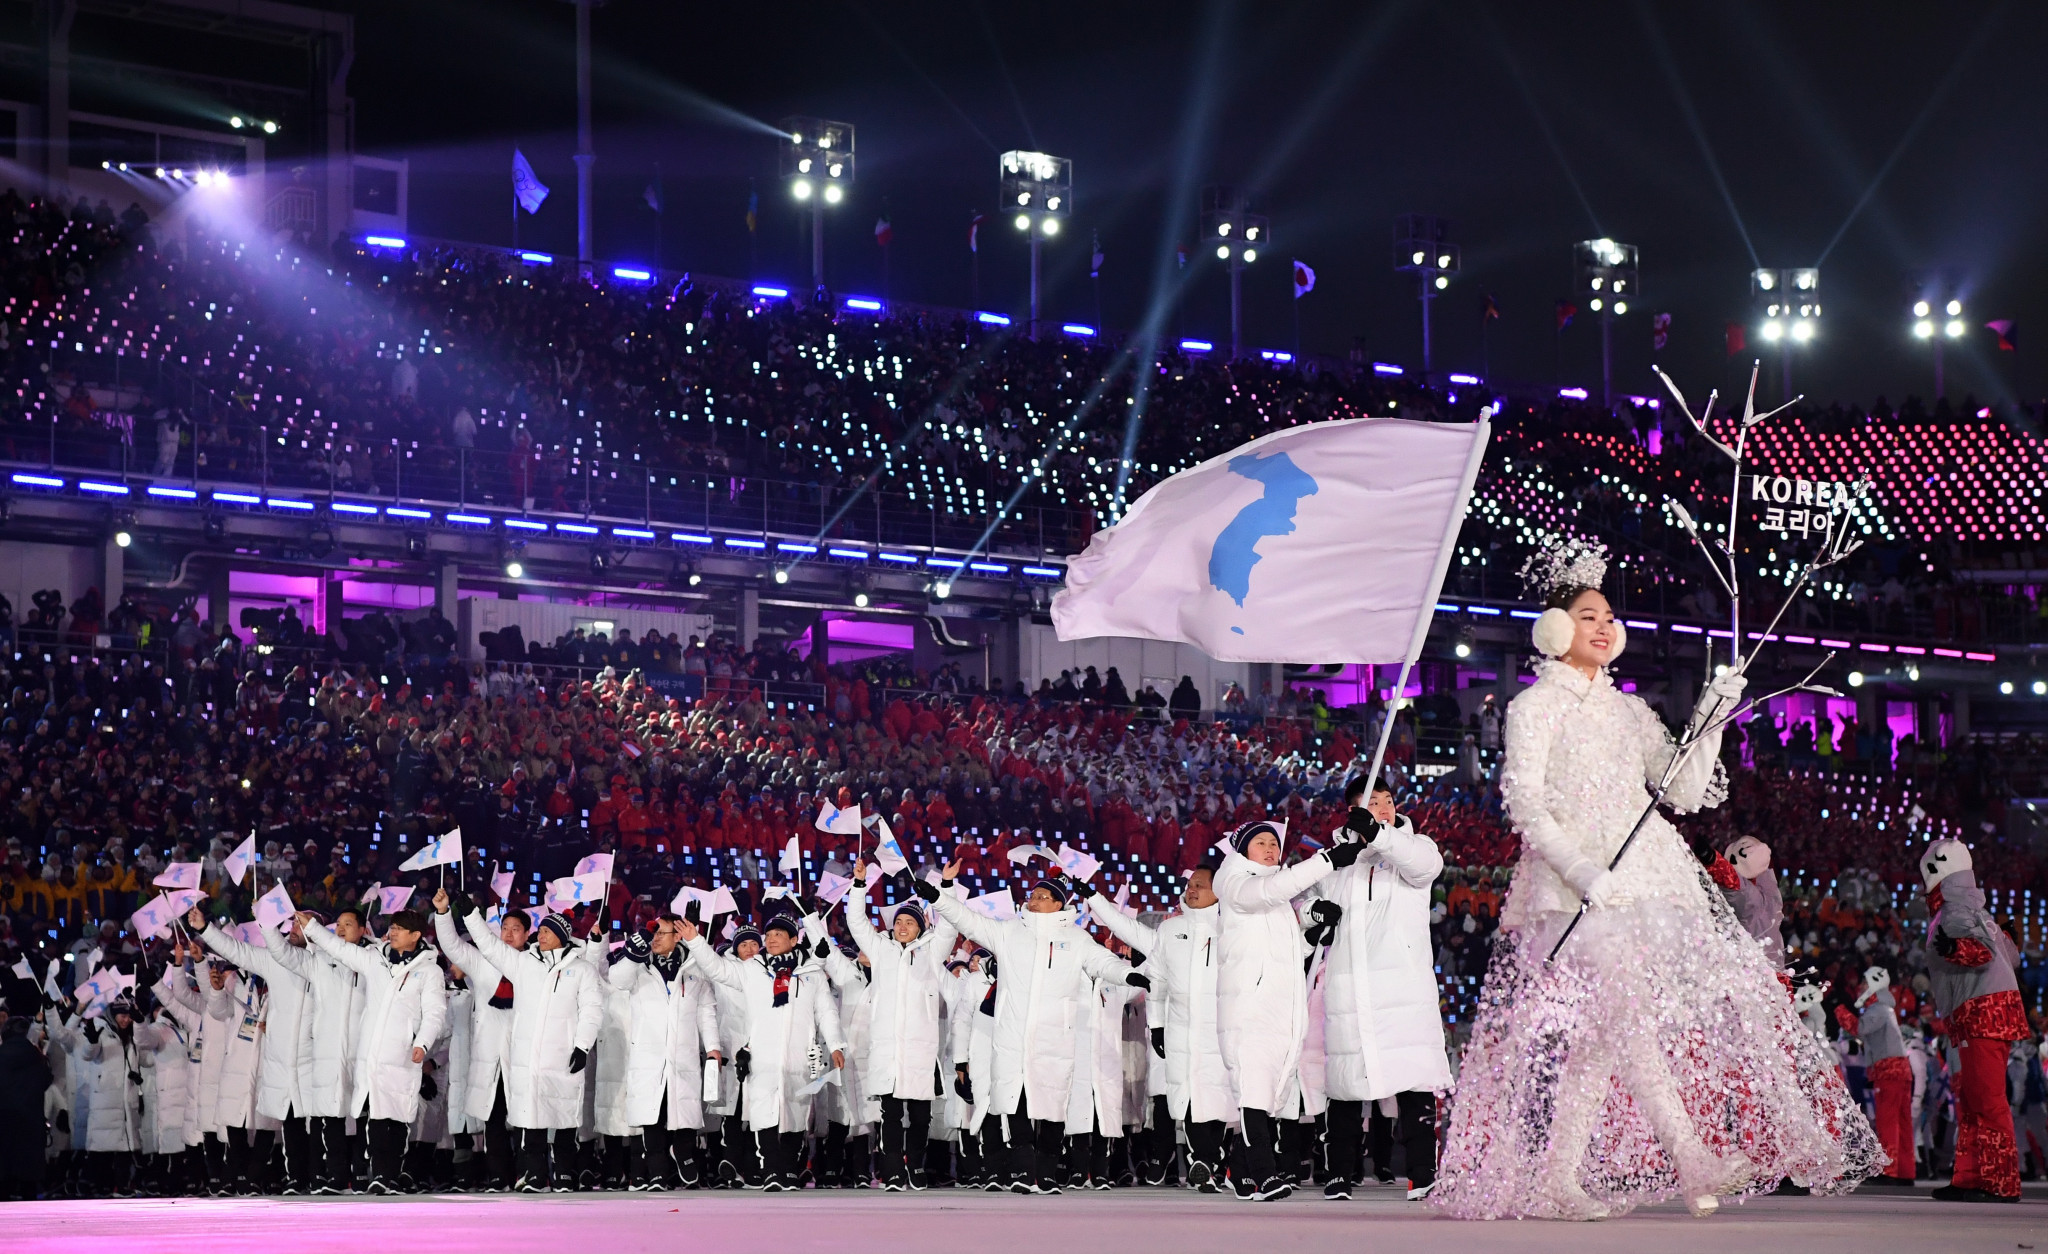 The two Koreas marched together under the unification flag at the Opening Ceremony of Pyeongchang 2018 ©Getty Images